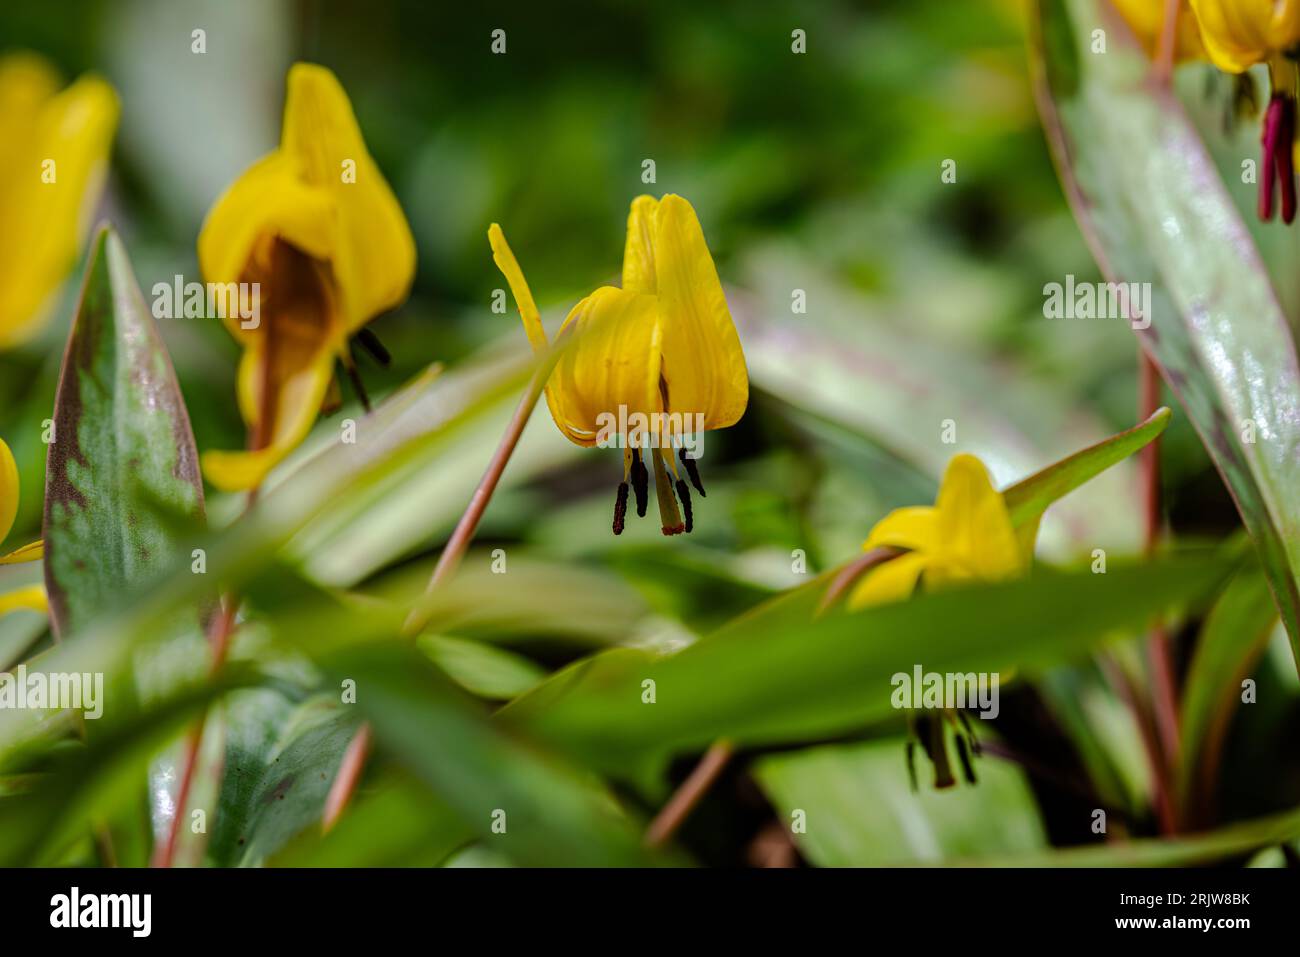 Trout lily flower in the city park Stock Photo